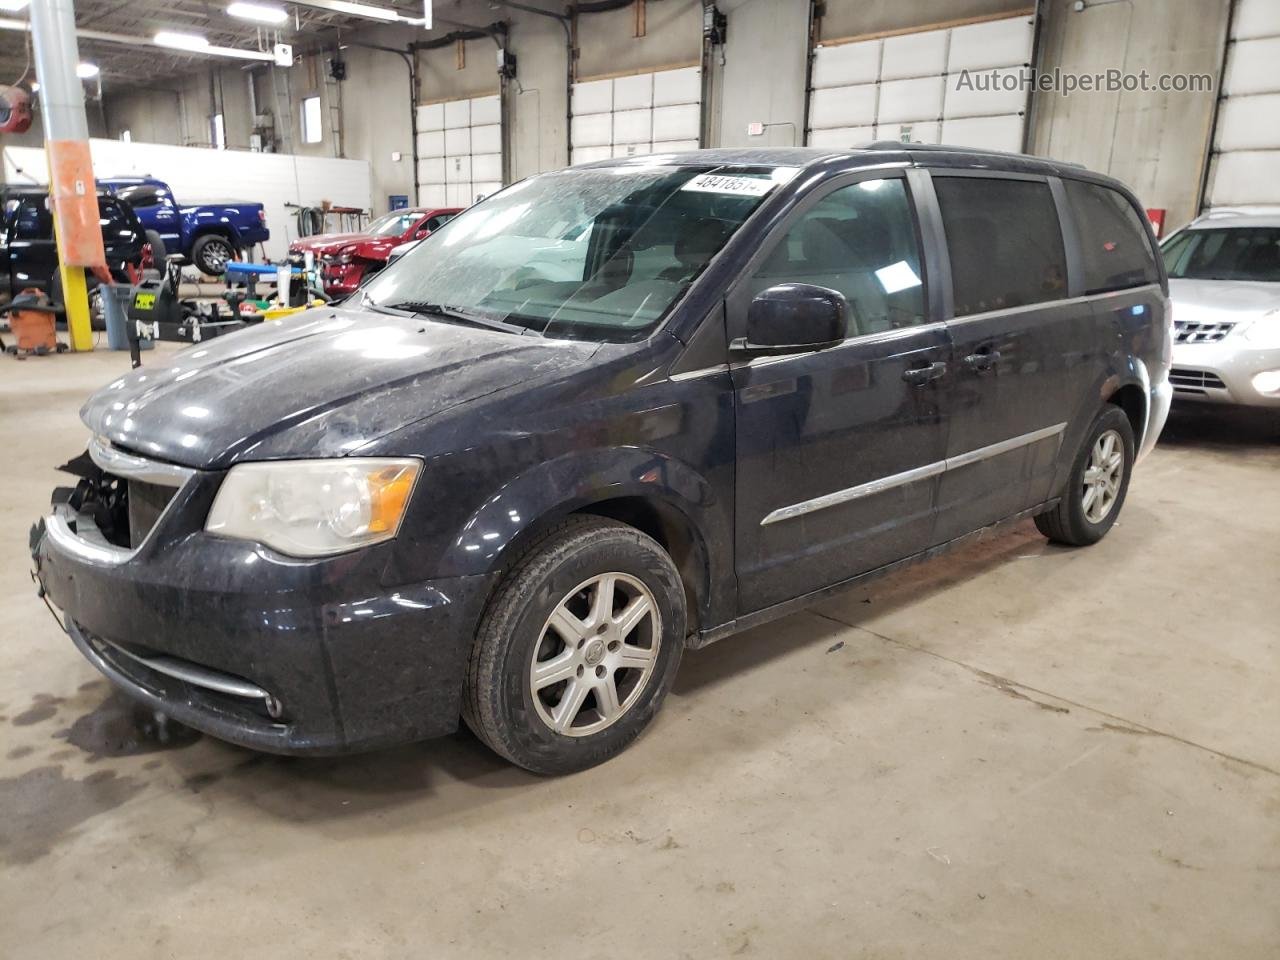 2011 Chrysler Town & Country Touring Blue vin: 2A4RR5DG8BR745809